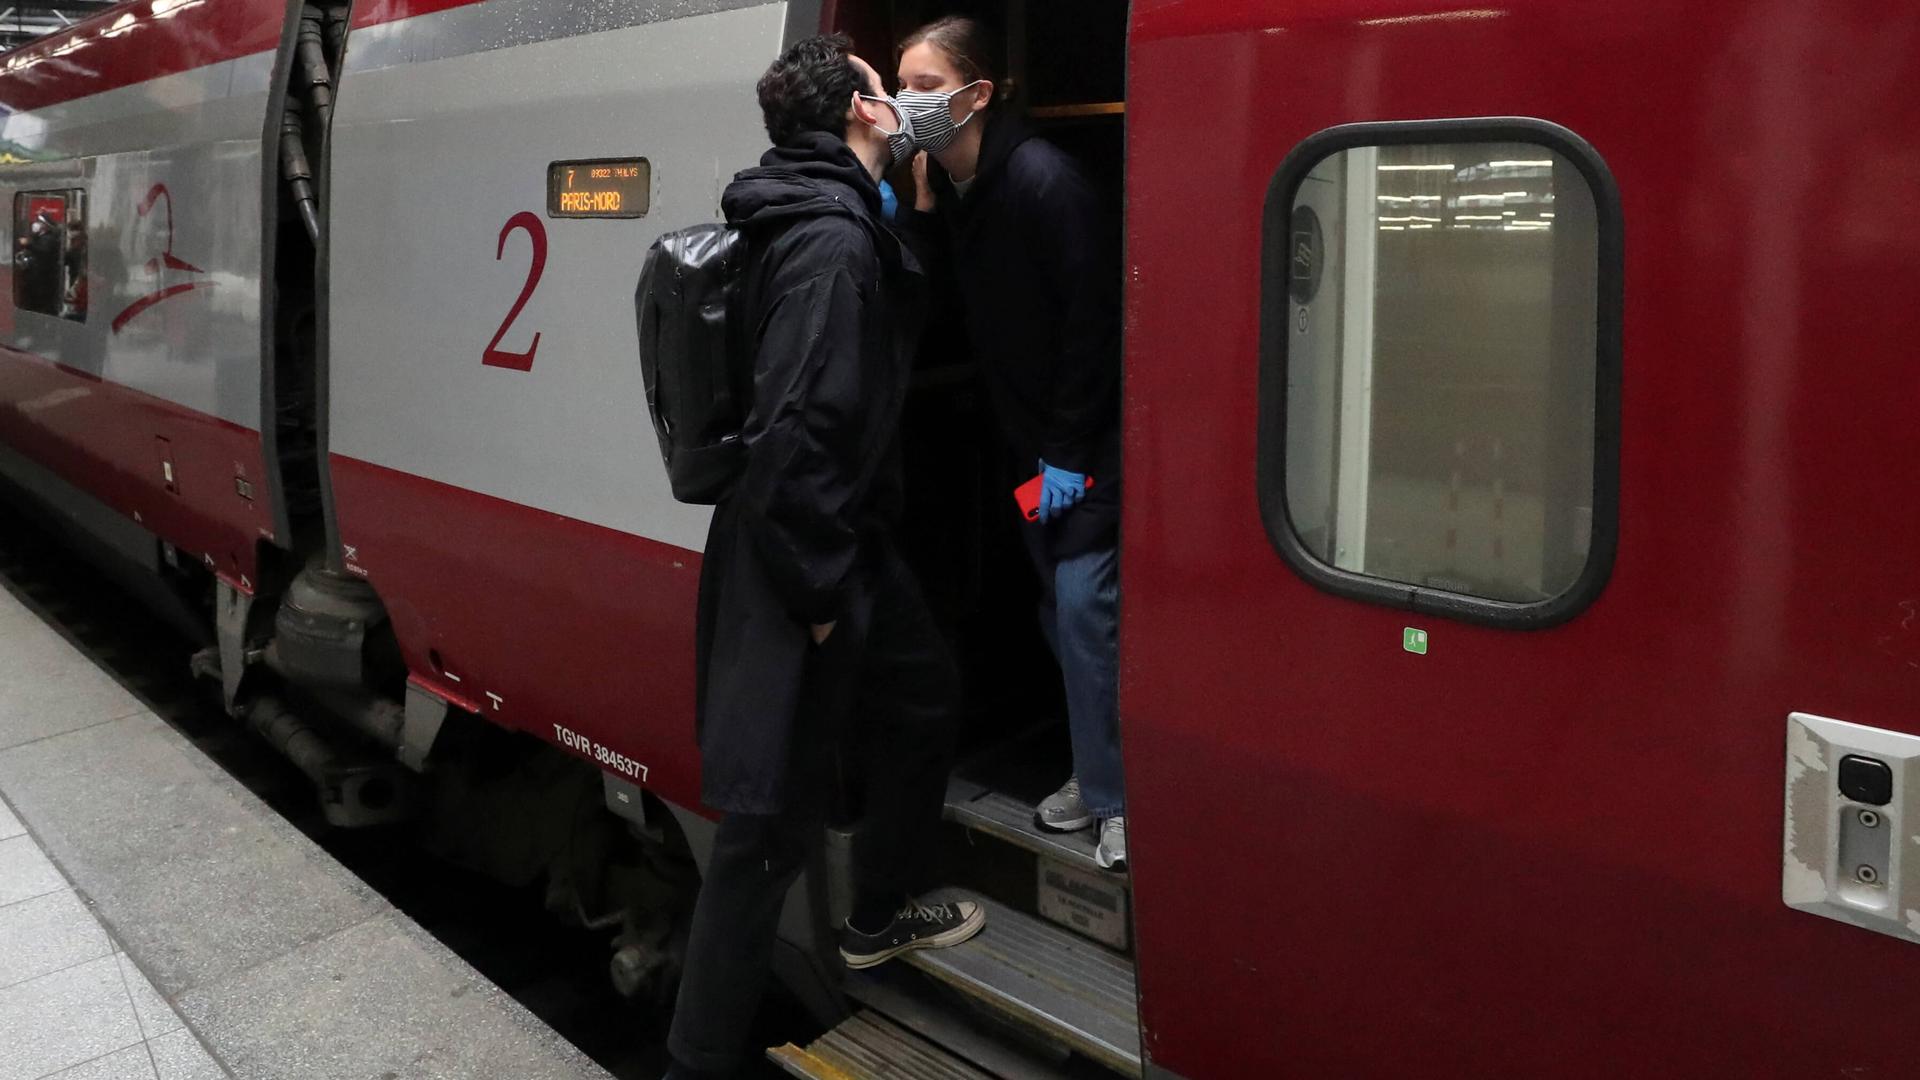 Two people kiss wearing face masks as they board a train